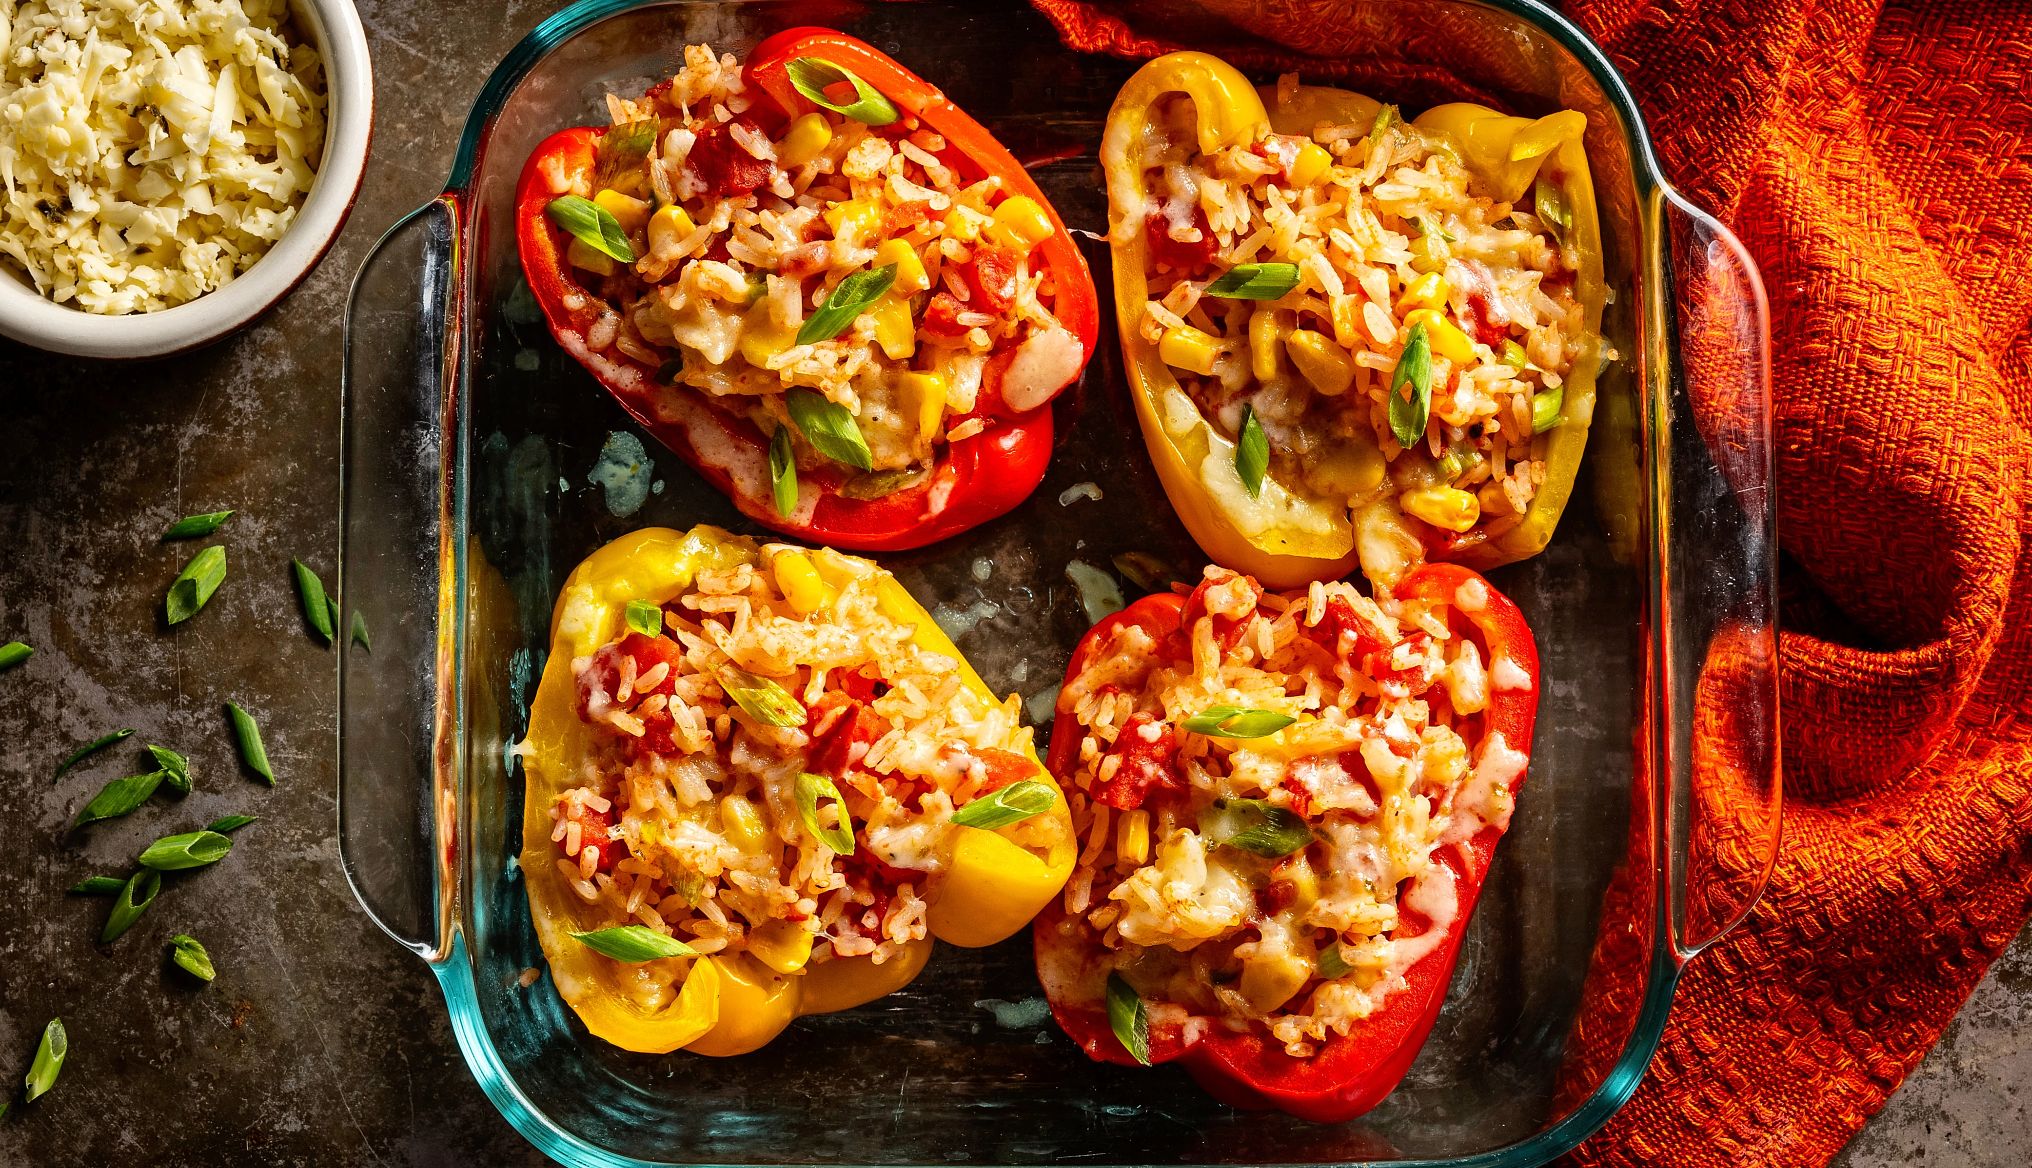 stuffed peppers in a baking dish